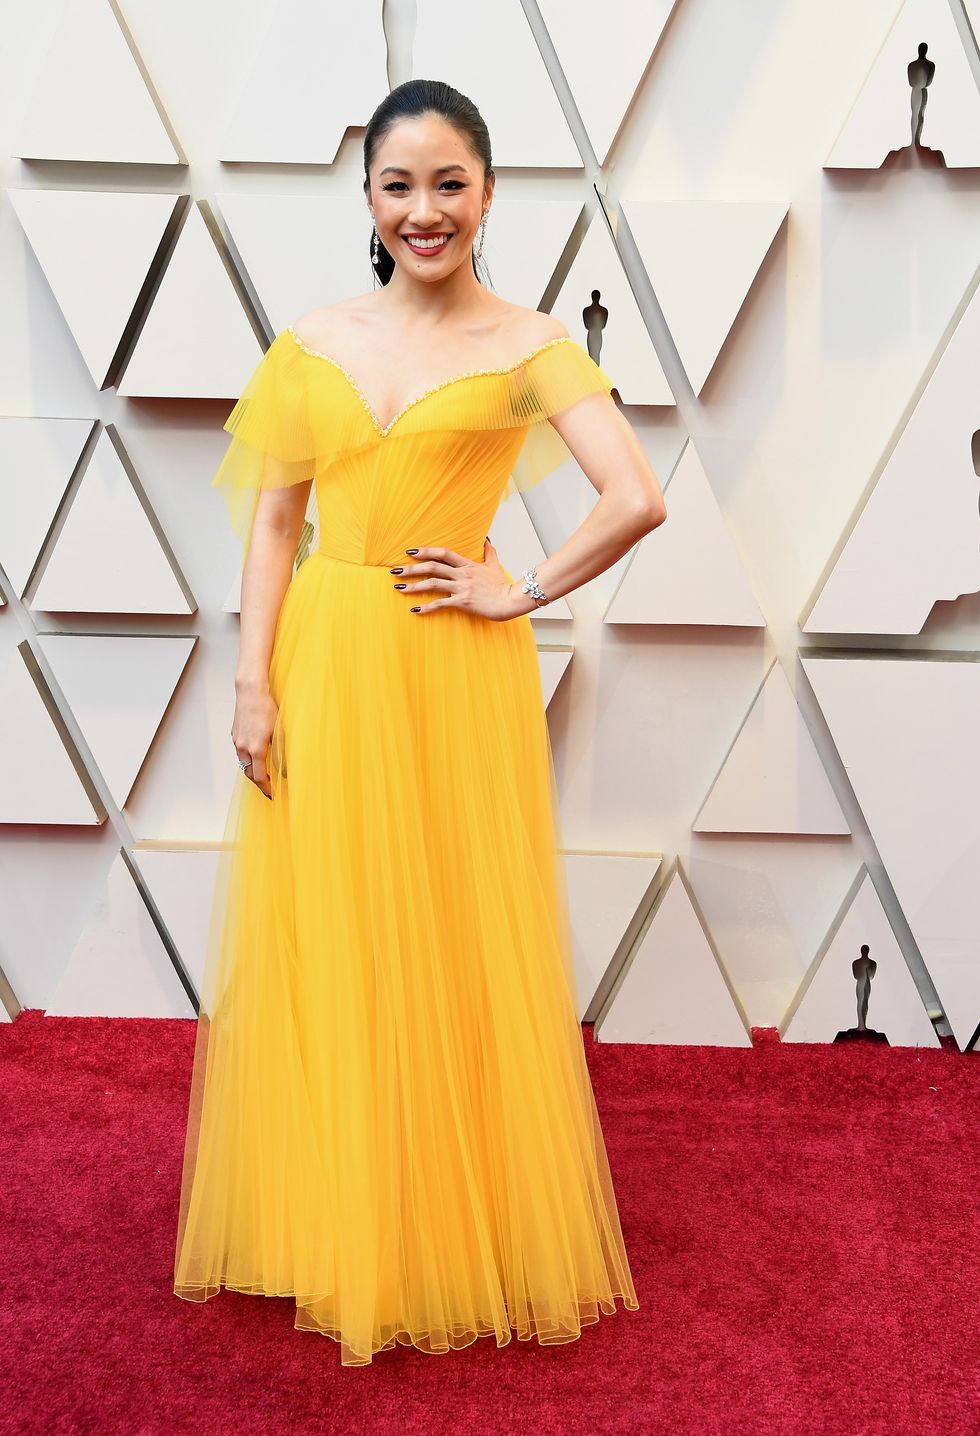 Dress, Clothing, Gown, Yellow, Shoulder, Red carpet, Fashion model, Carpet, A-line, Flooring, 